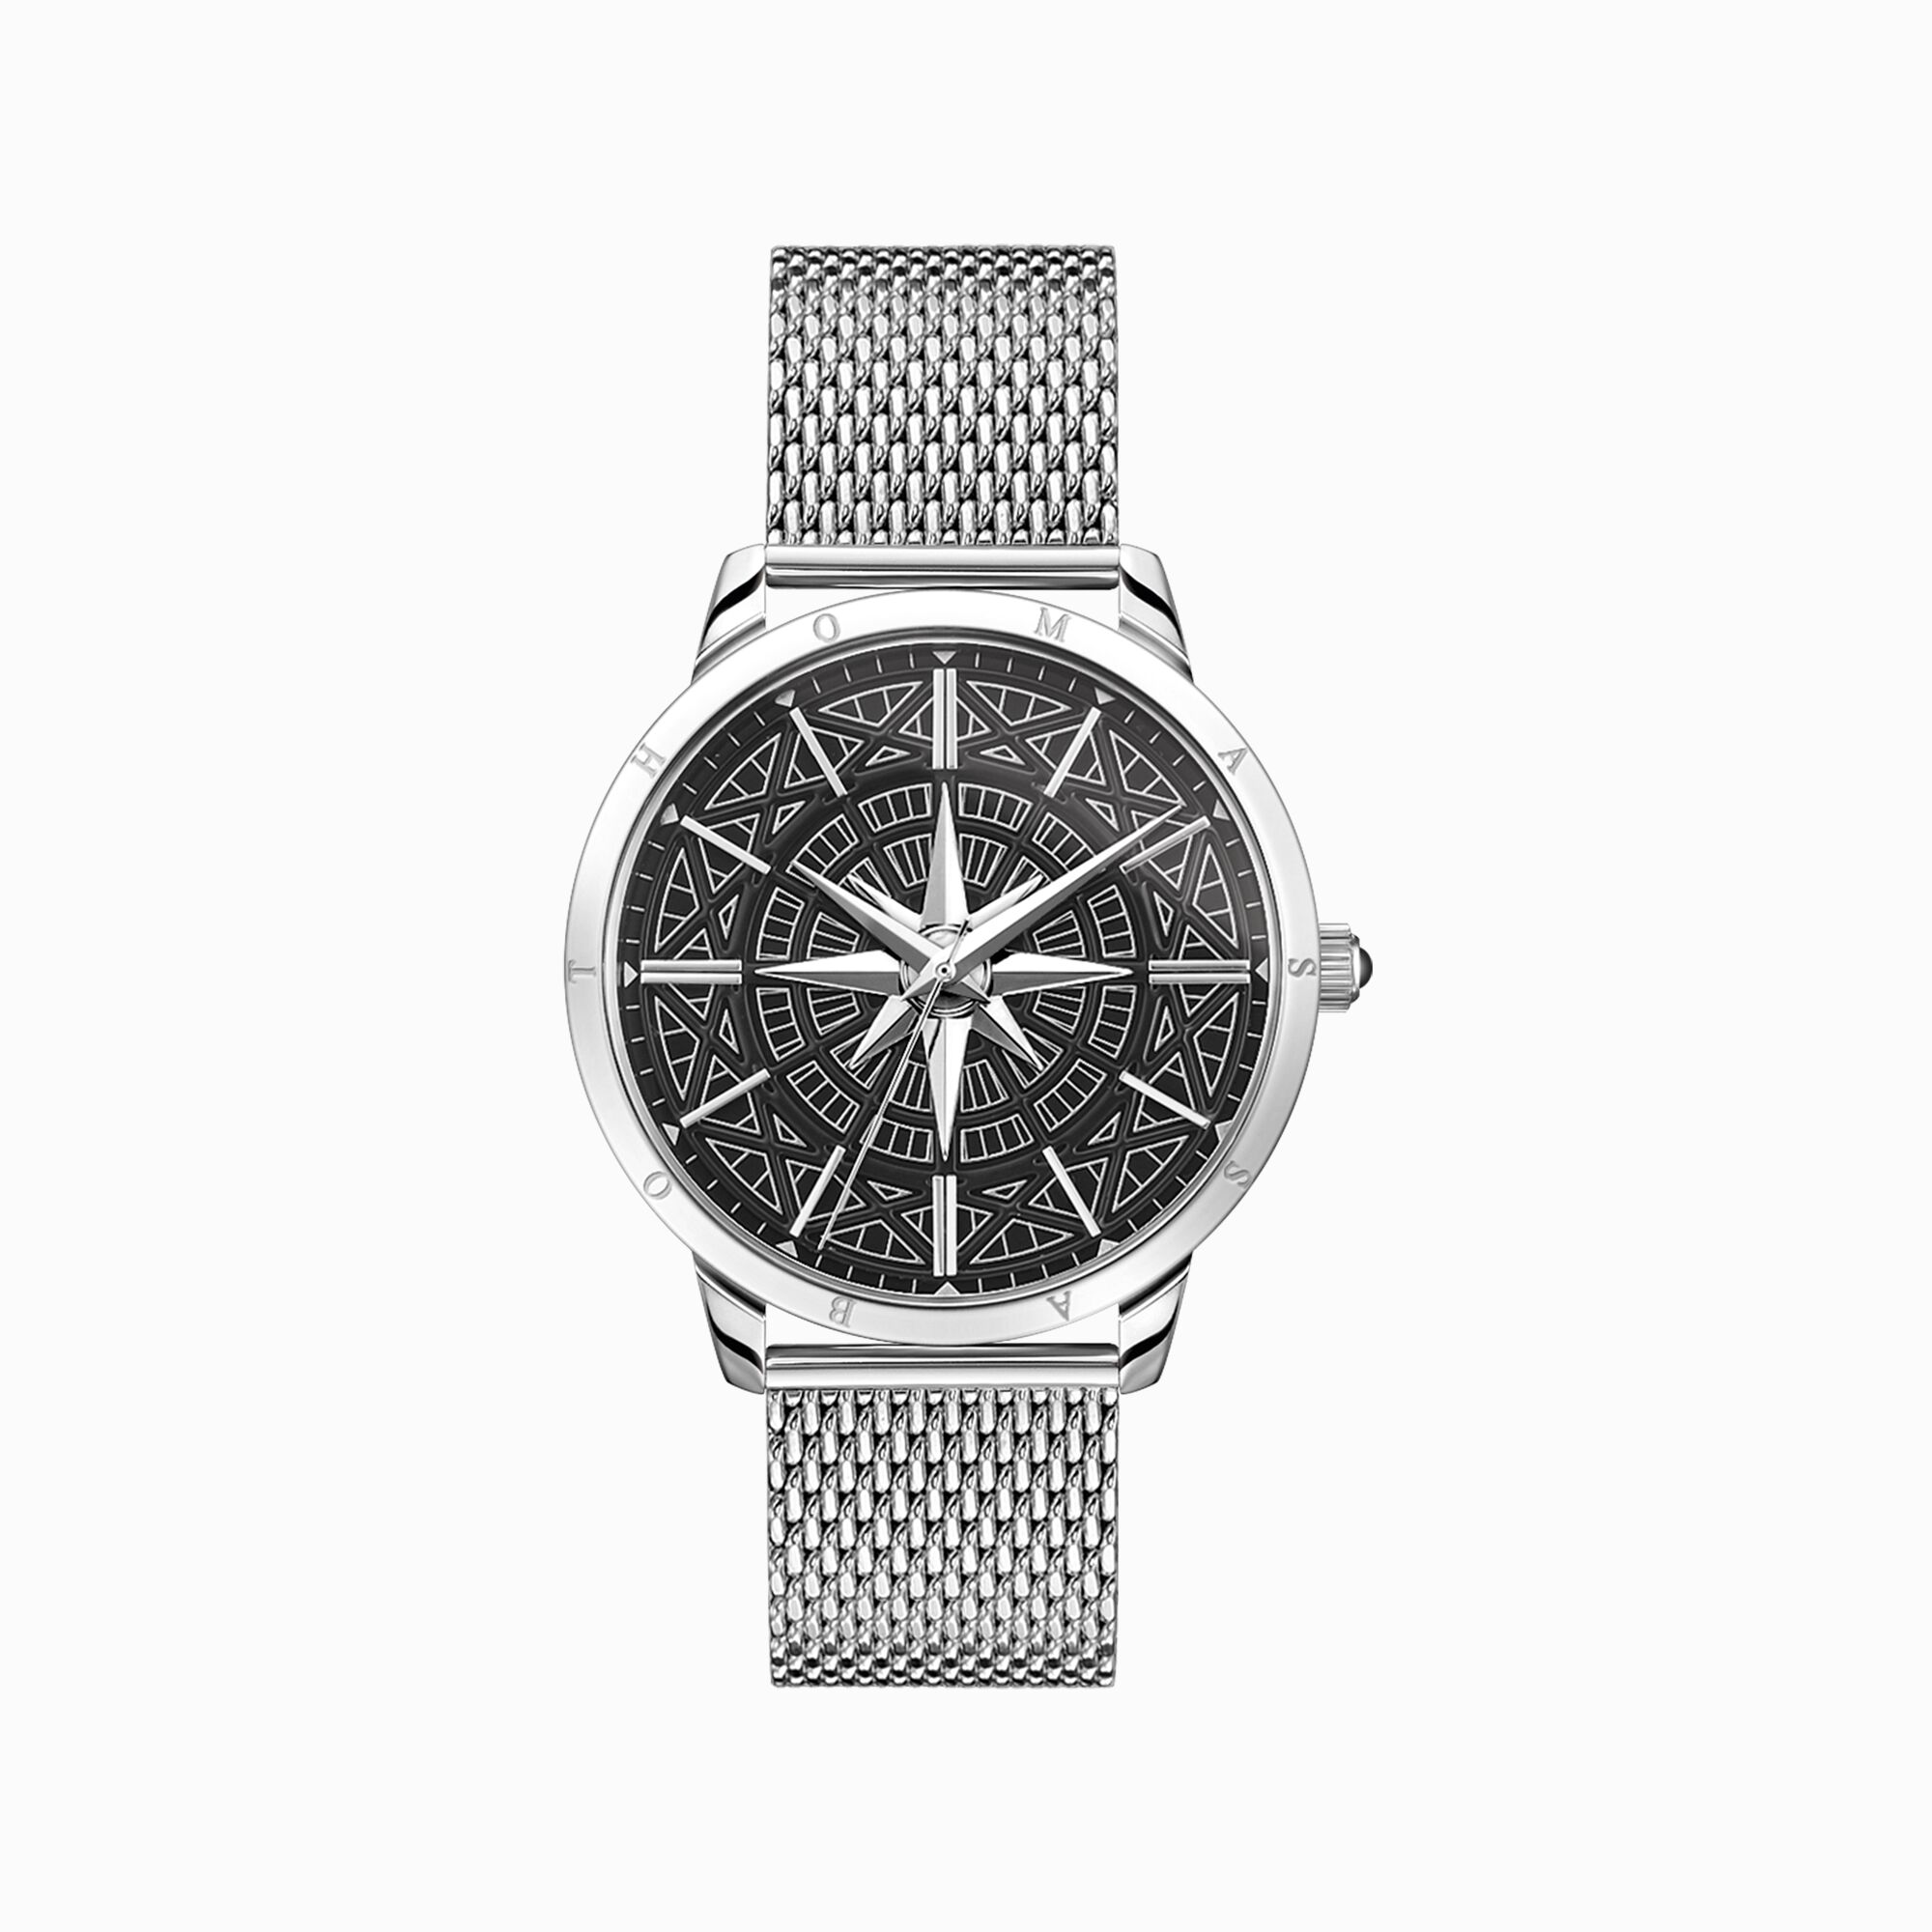 Men&rsquo;s watch Rebel spirit compass from the  collection in the THOMAS SABO online store